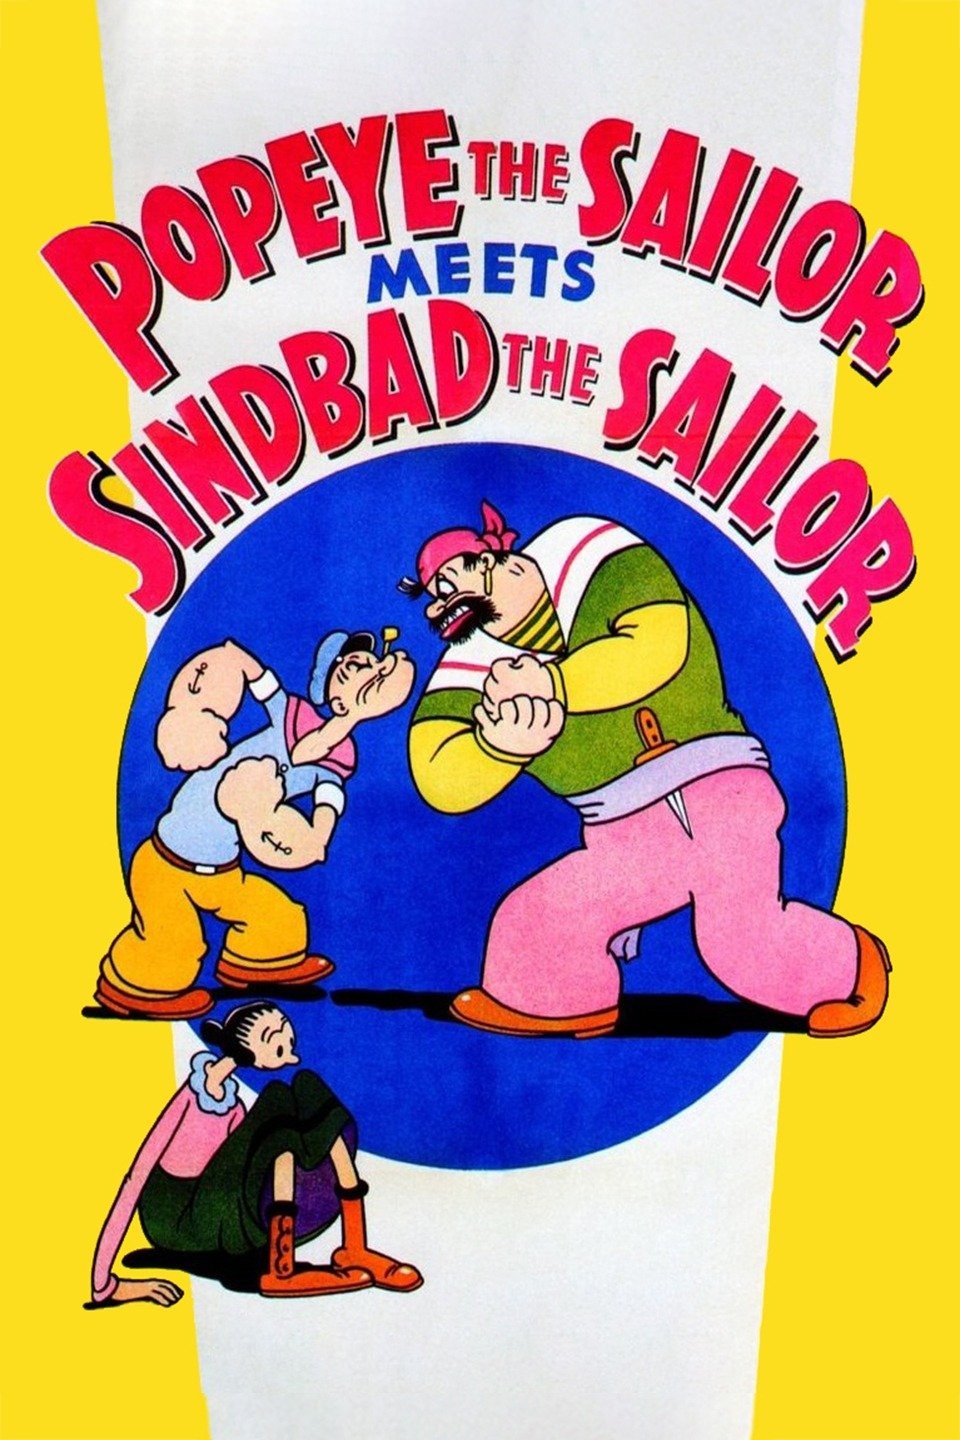 Popeye the Sailor Meets Sindbad the Sailor | Rotten Tomatoes